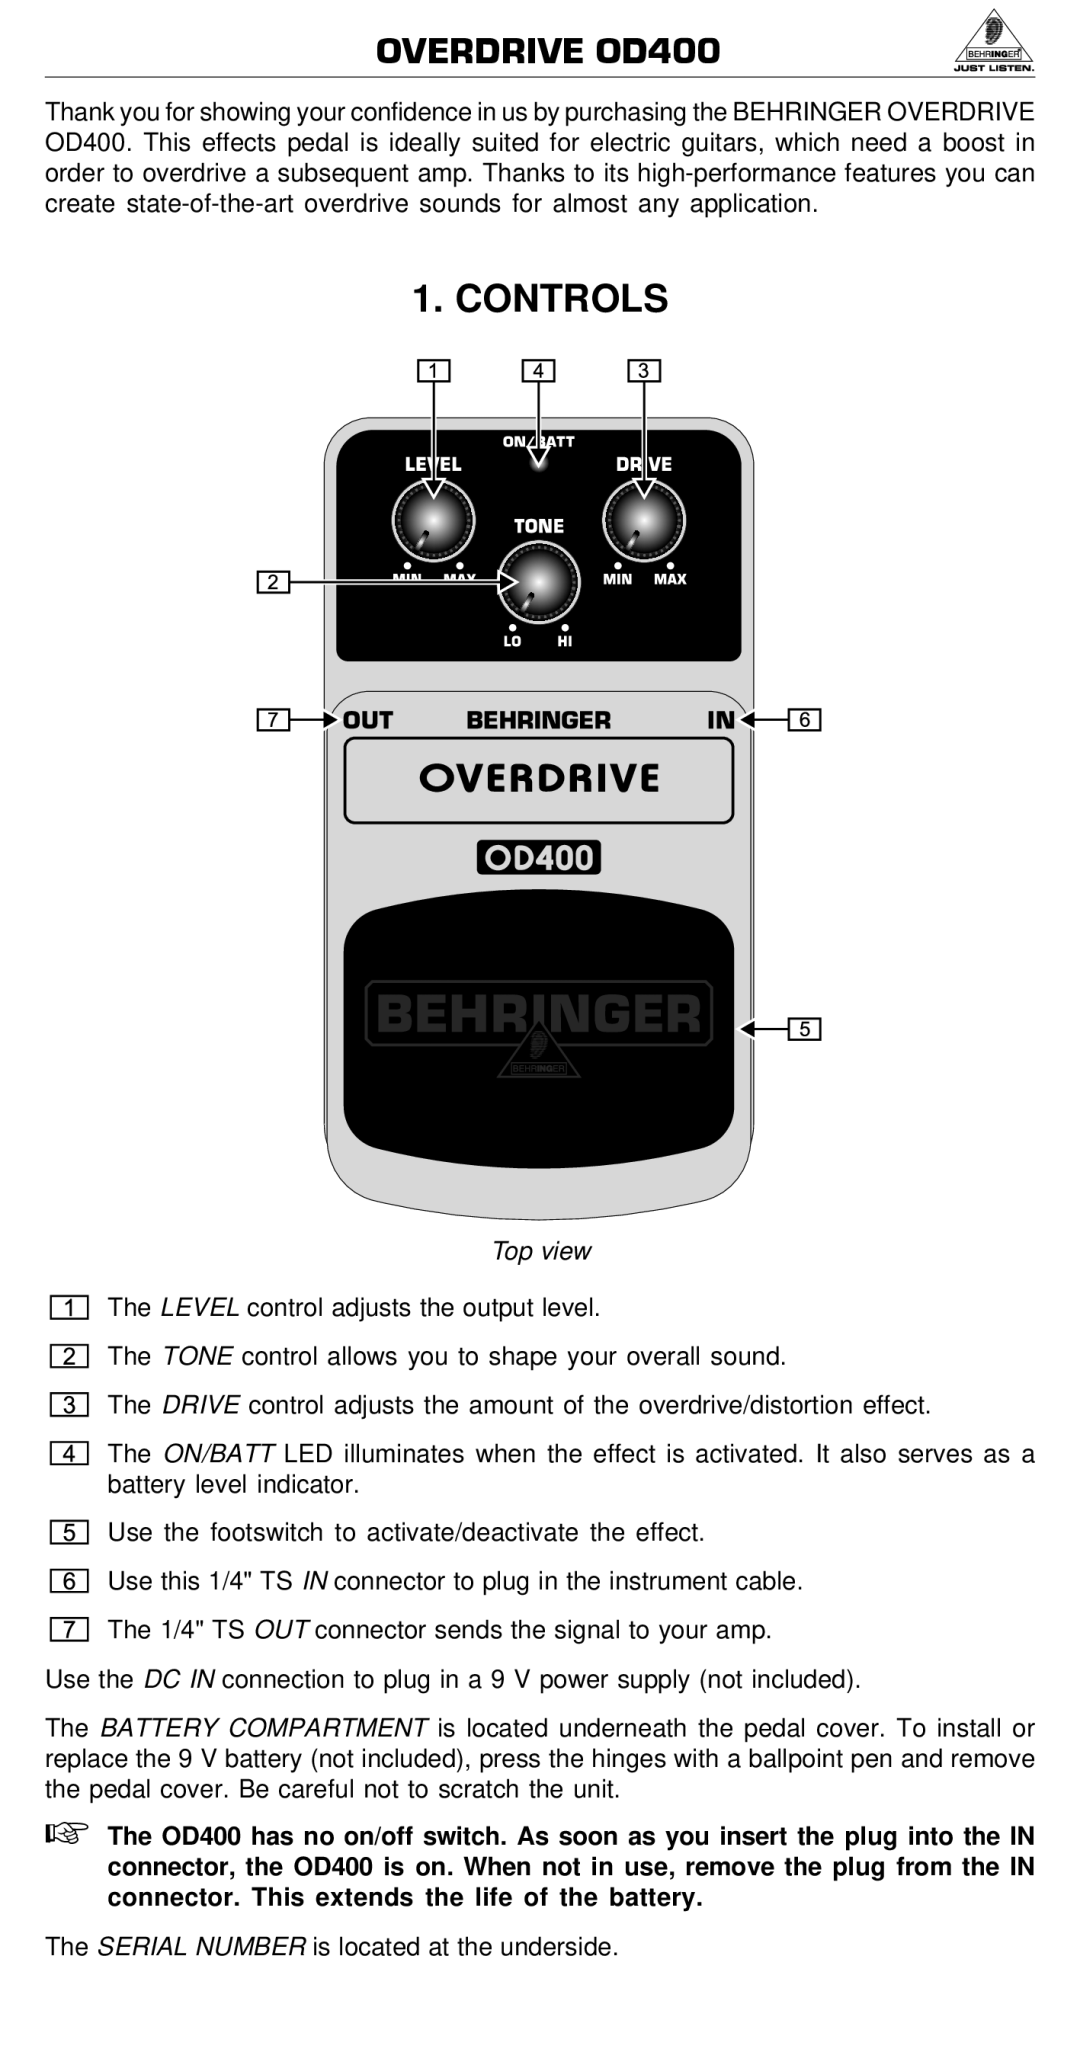 Behringer manual OVERDRIVE OD400, Controls, Top view 